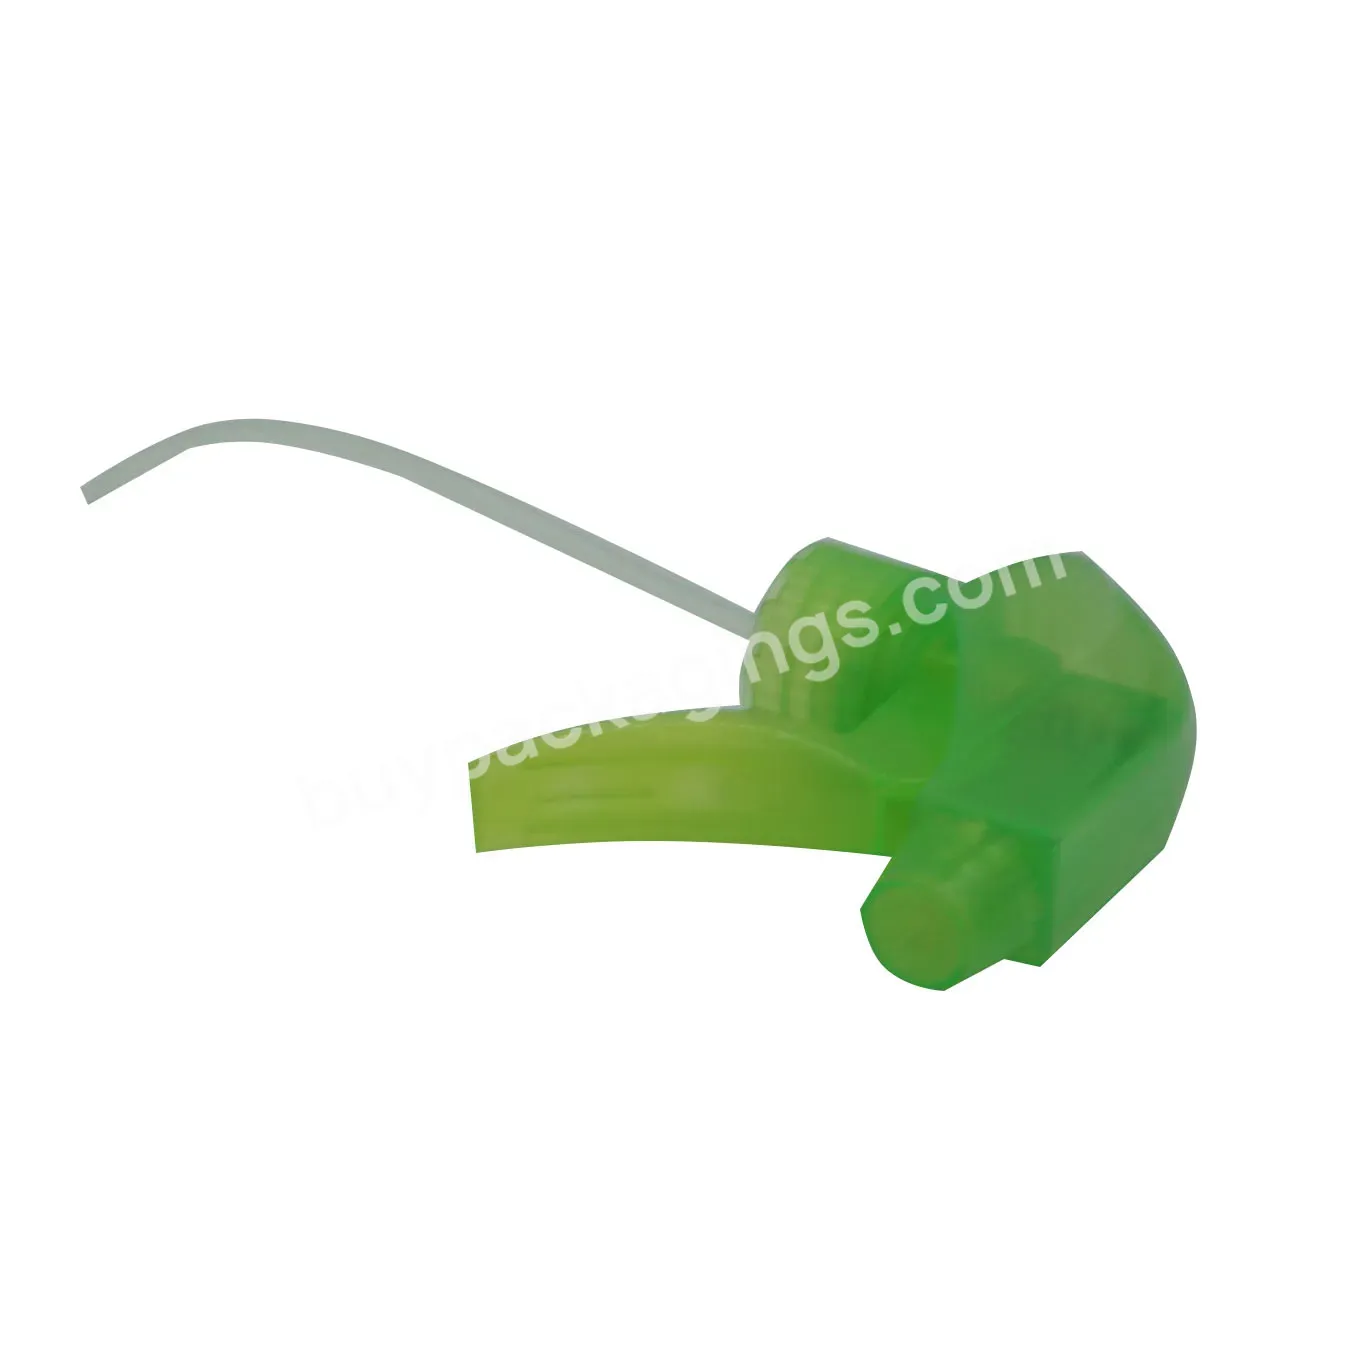 28/400 28/410 Low Price Wholesale Pcr Full Plastic Anti-chemical Use Leak Proof Green Trigger Sprayer For Cleaning Bottle - Buy Low Price Wholesale Pcr Trigger Sprayer,Full Plastic Anti-chemical Use Leak Proof Green Trigger Sprayer,Trigger Sprayer Fo